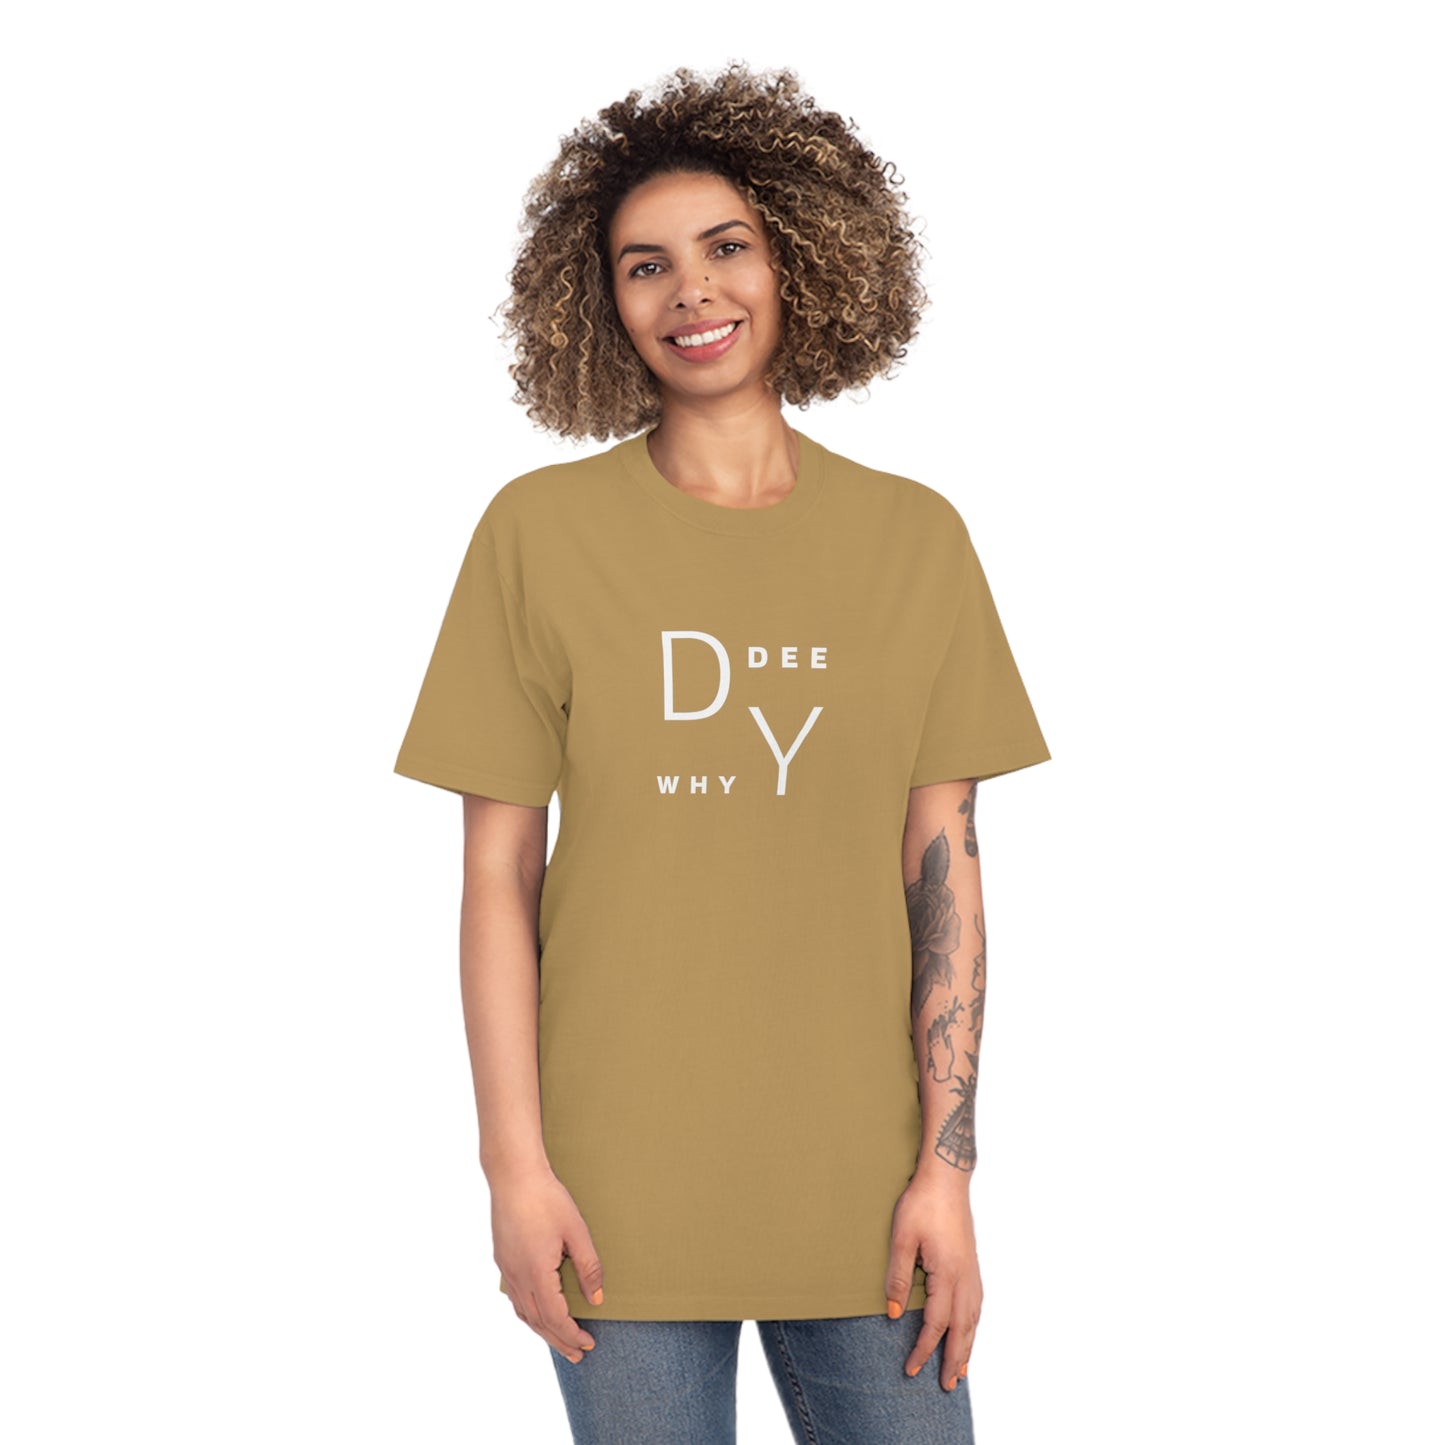 Faded Cotton T-Shirt Northern Beaches Dee Why logo